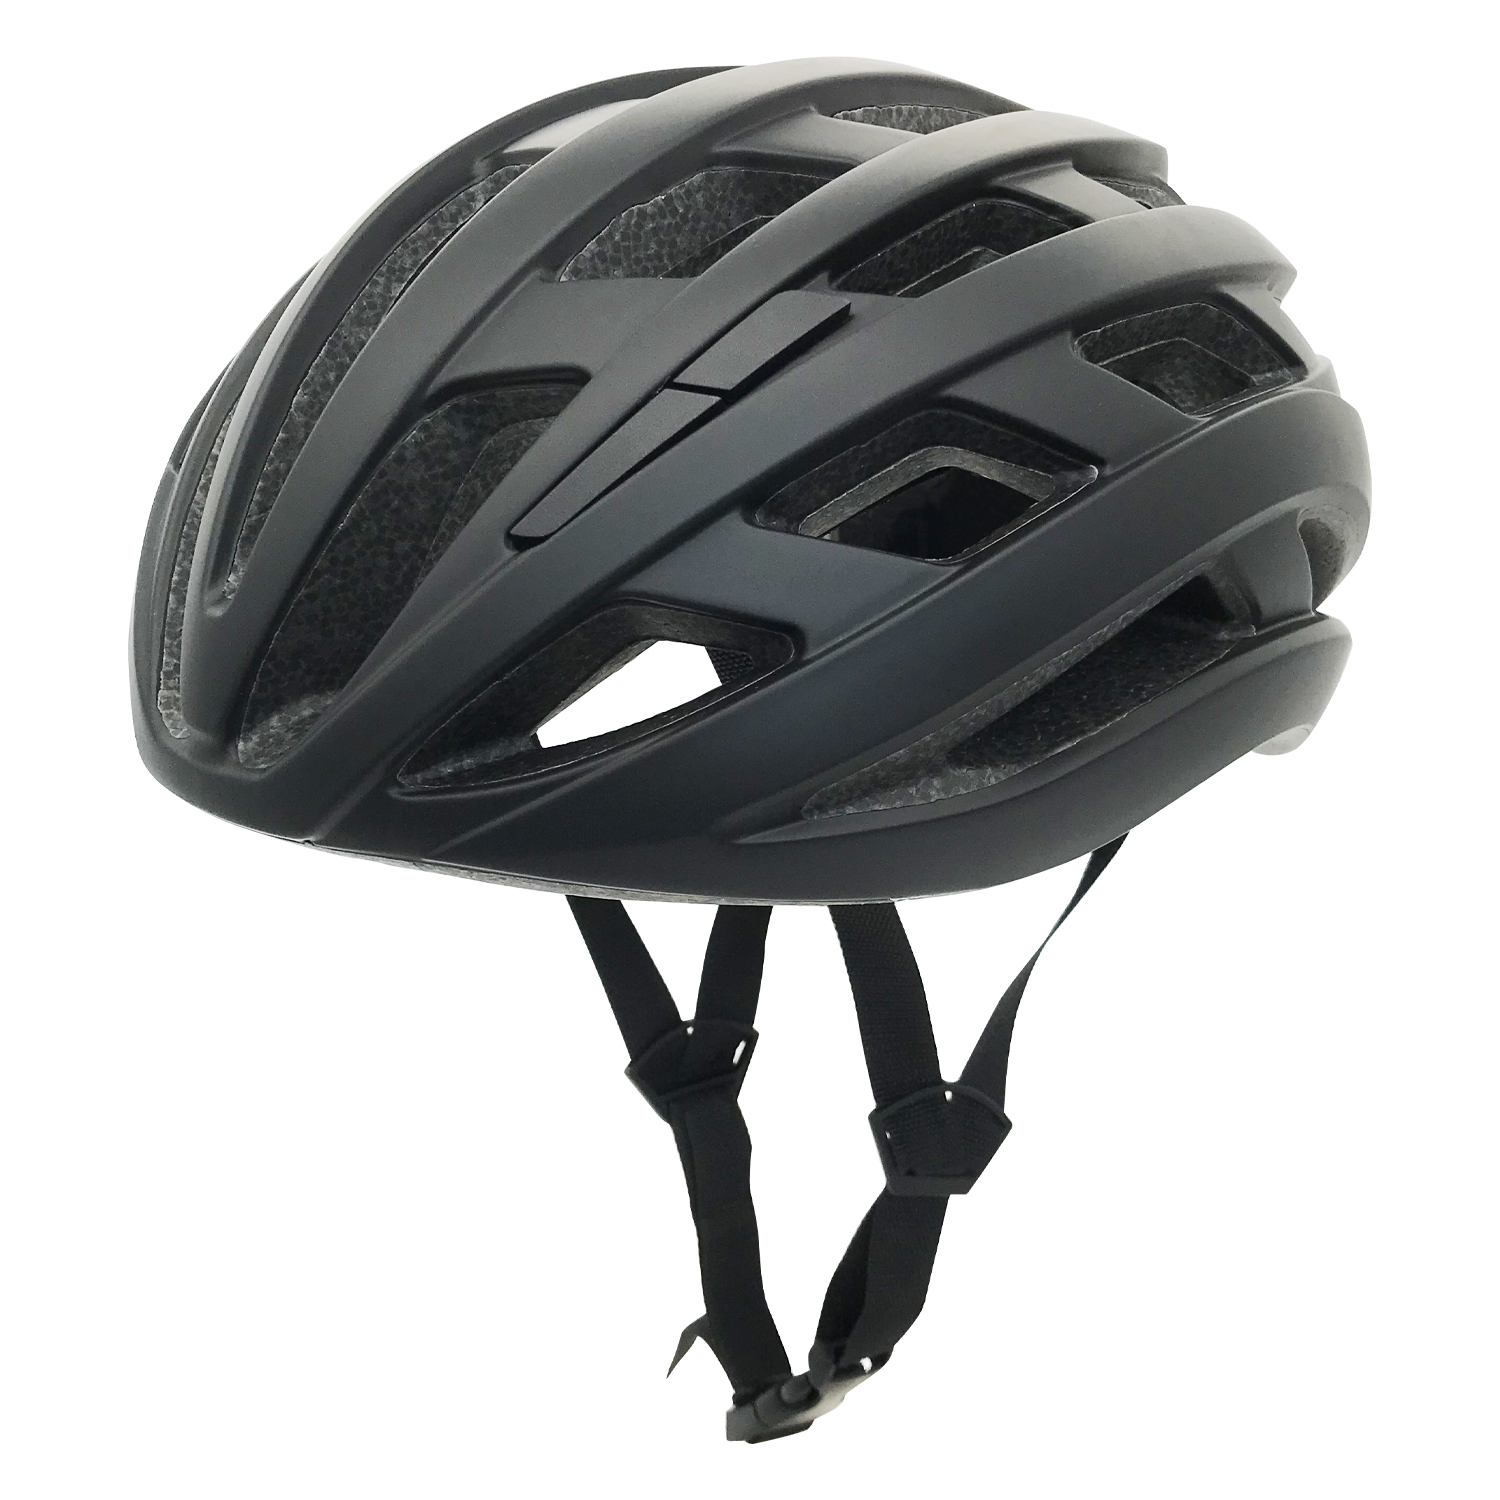 Cycling Helmet VC301-Black Featured Image